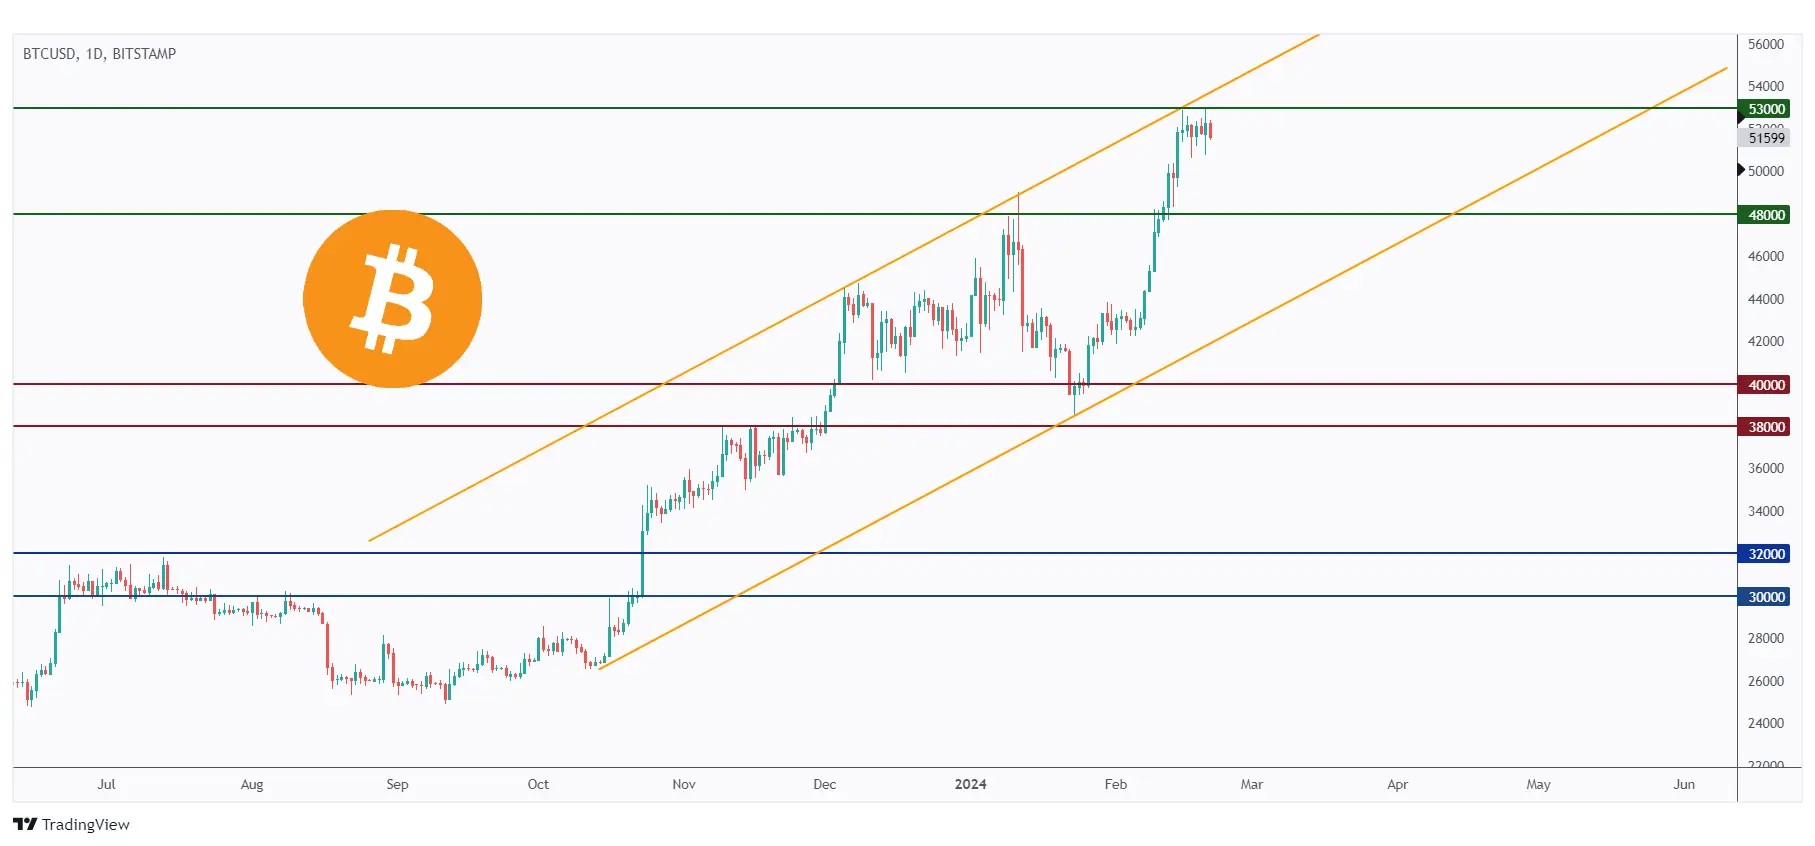 BTC daily chart trading inside a rising channel, however it is currently sitting around the upper bound of the channel and $53,000 resistance.